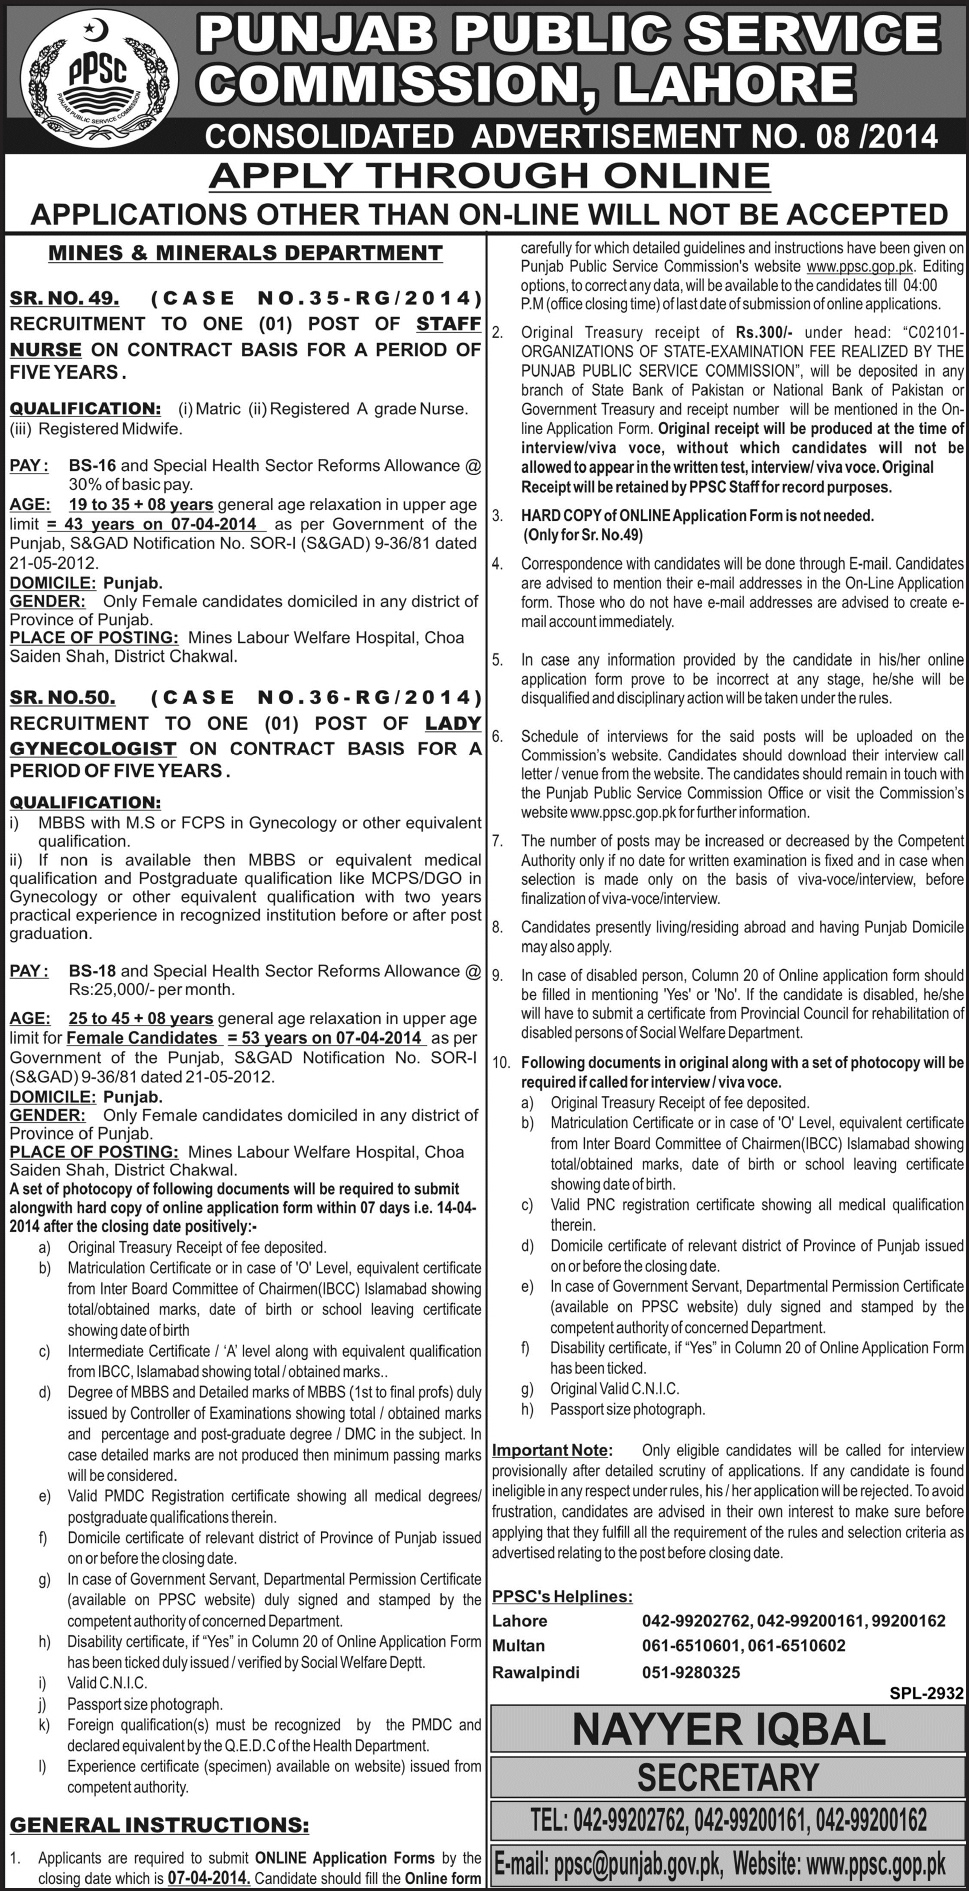 PPSC Jobs March 2014 Consolidated Advertisement No 08/2014